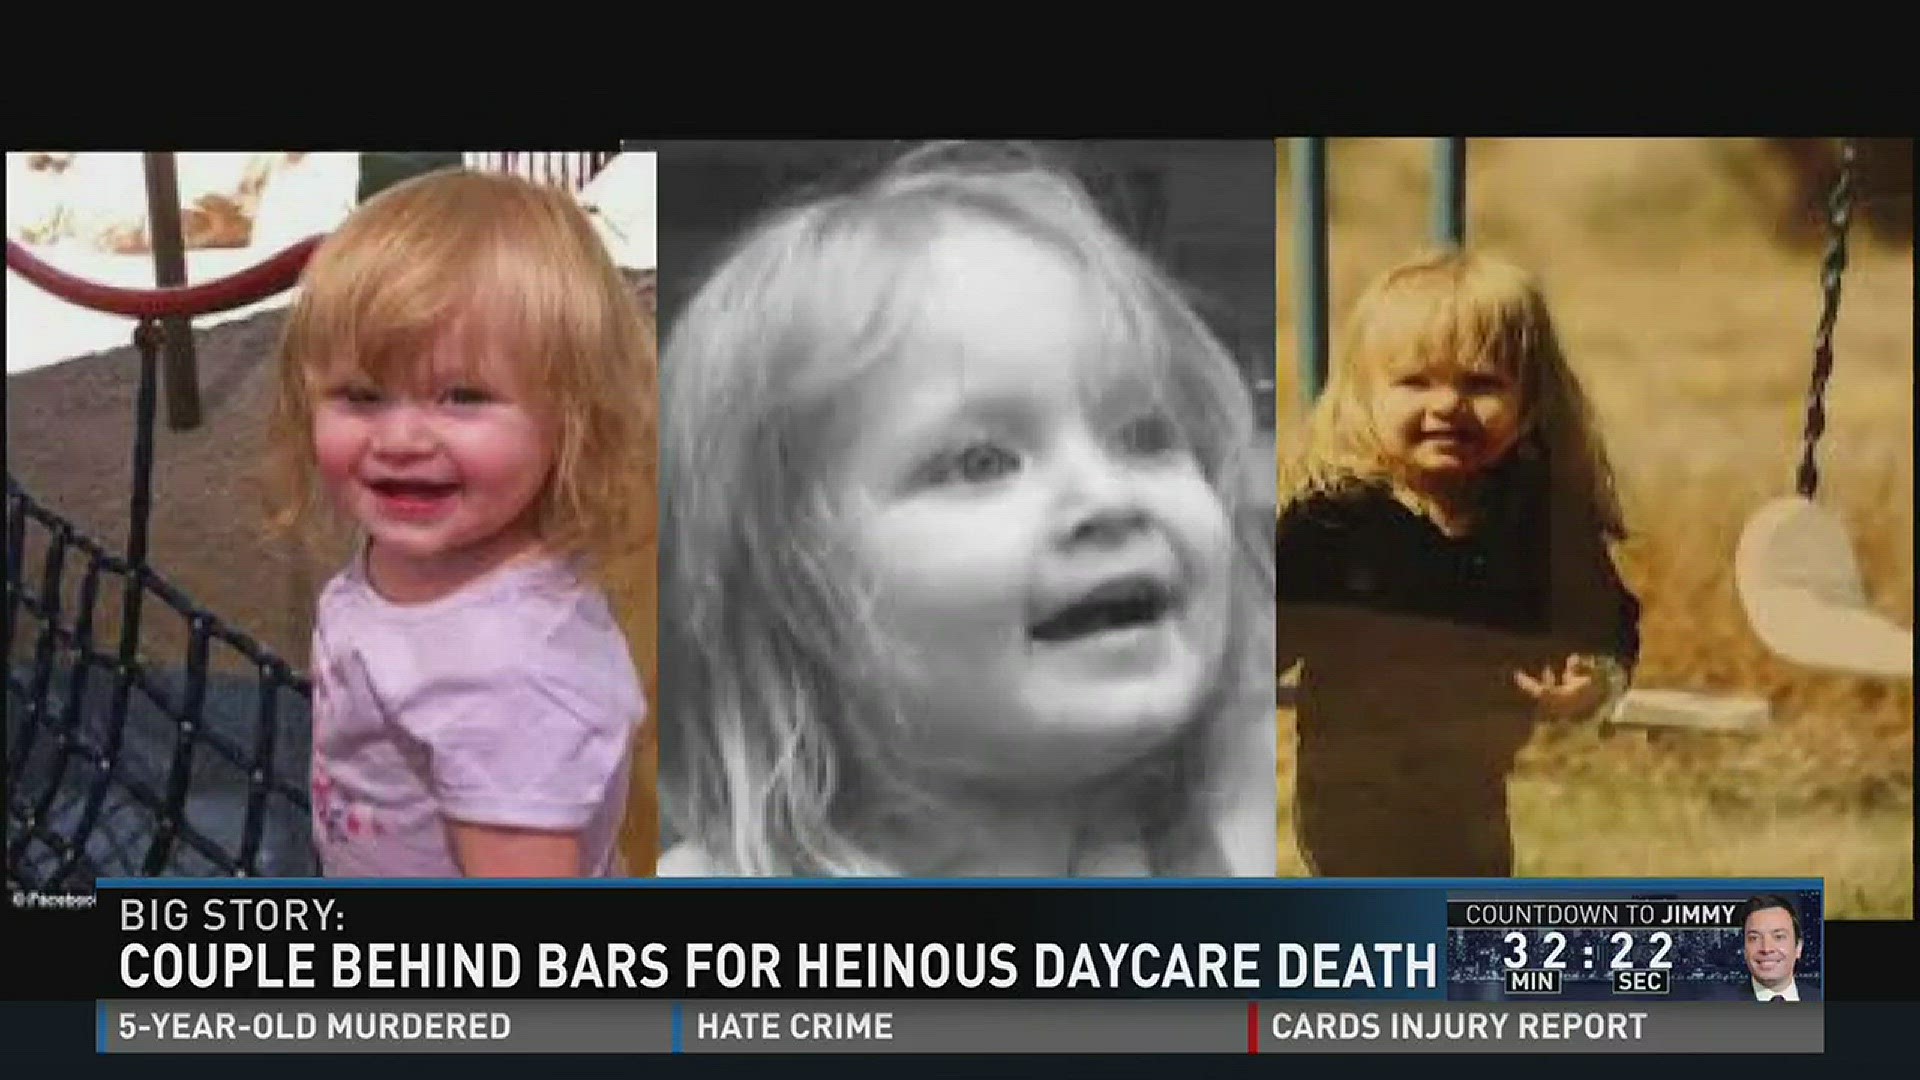 Couple behind bars for heinous daycare death.